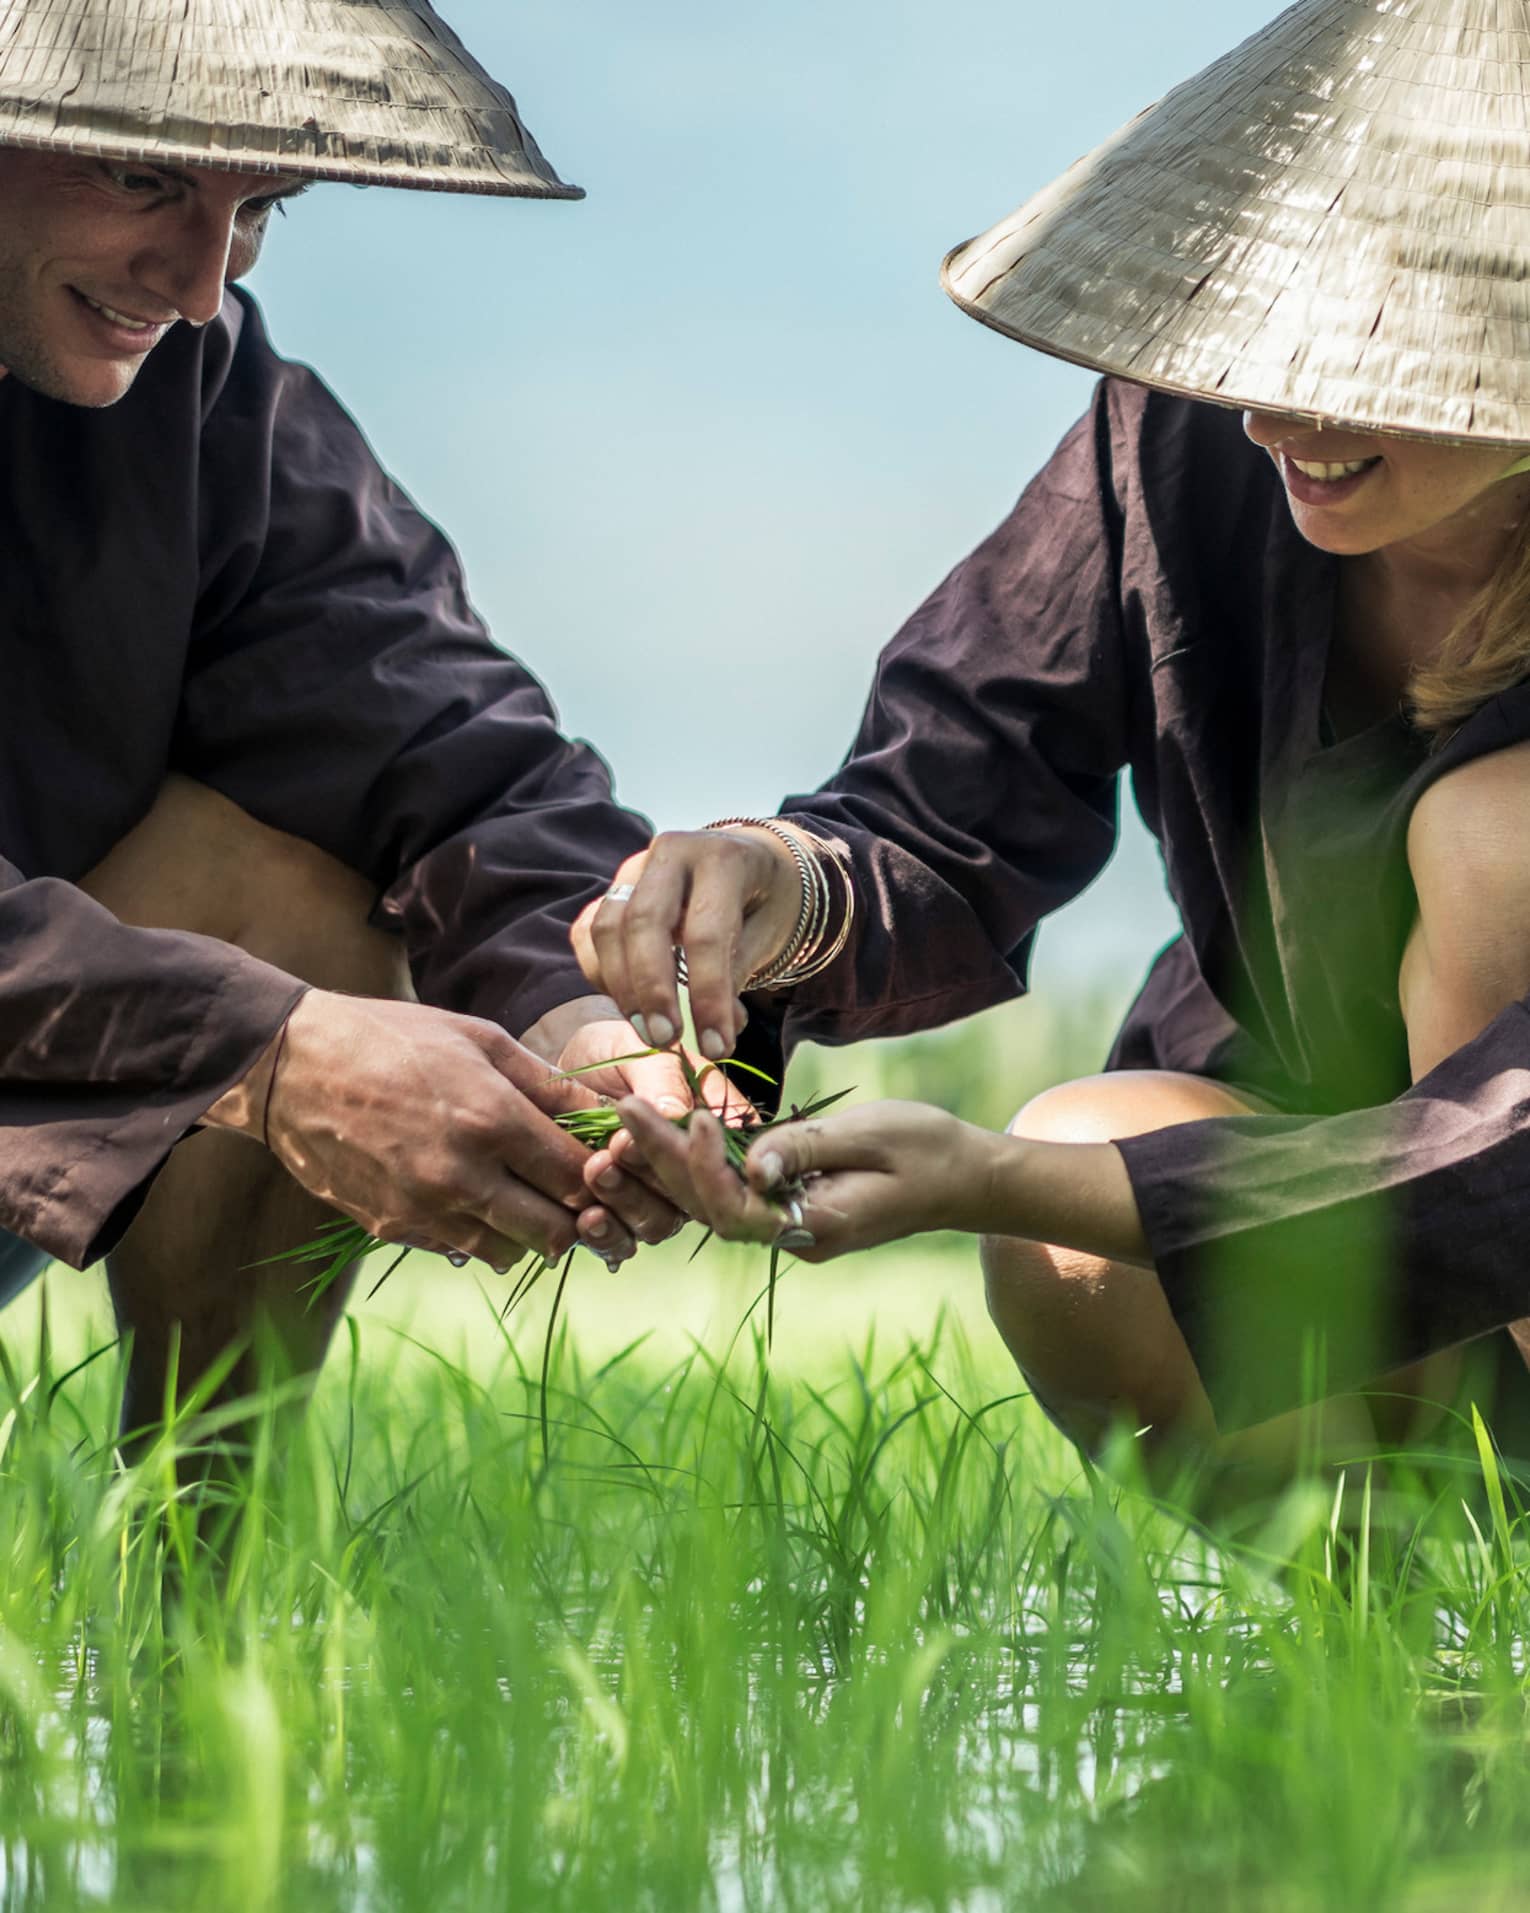 Couple wearing traditional farmer hats plant rice seedlings in water, grass